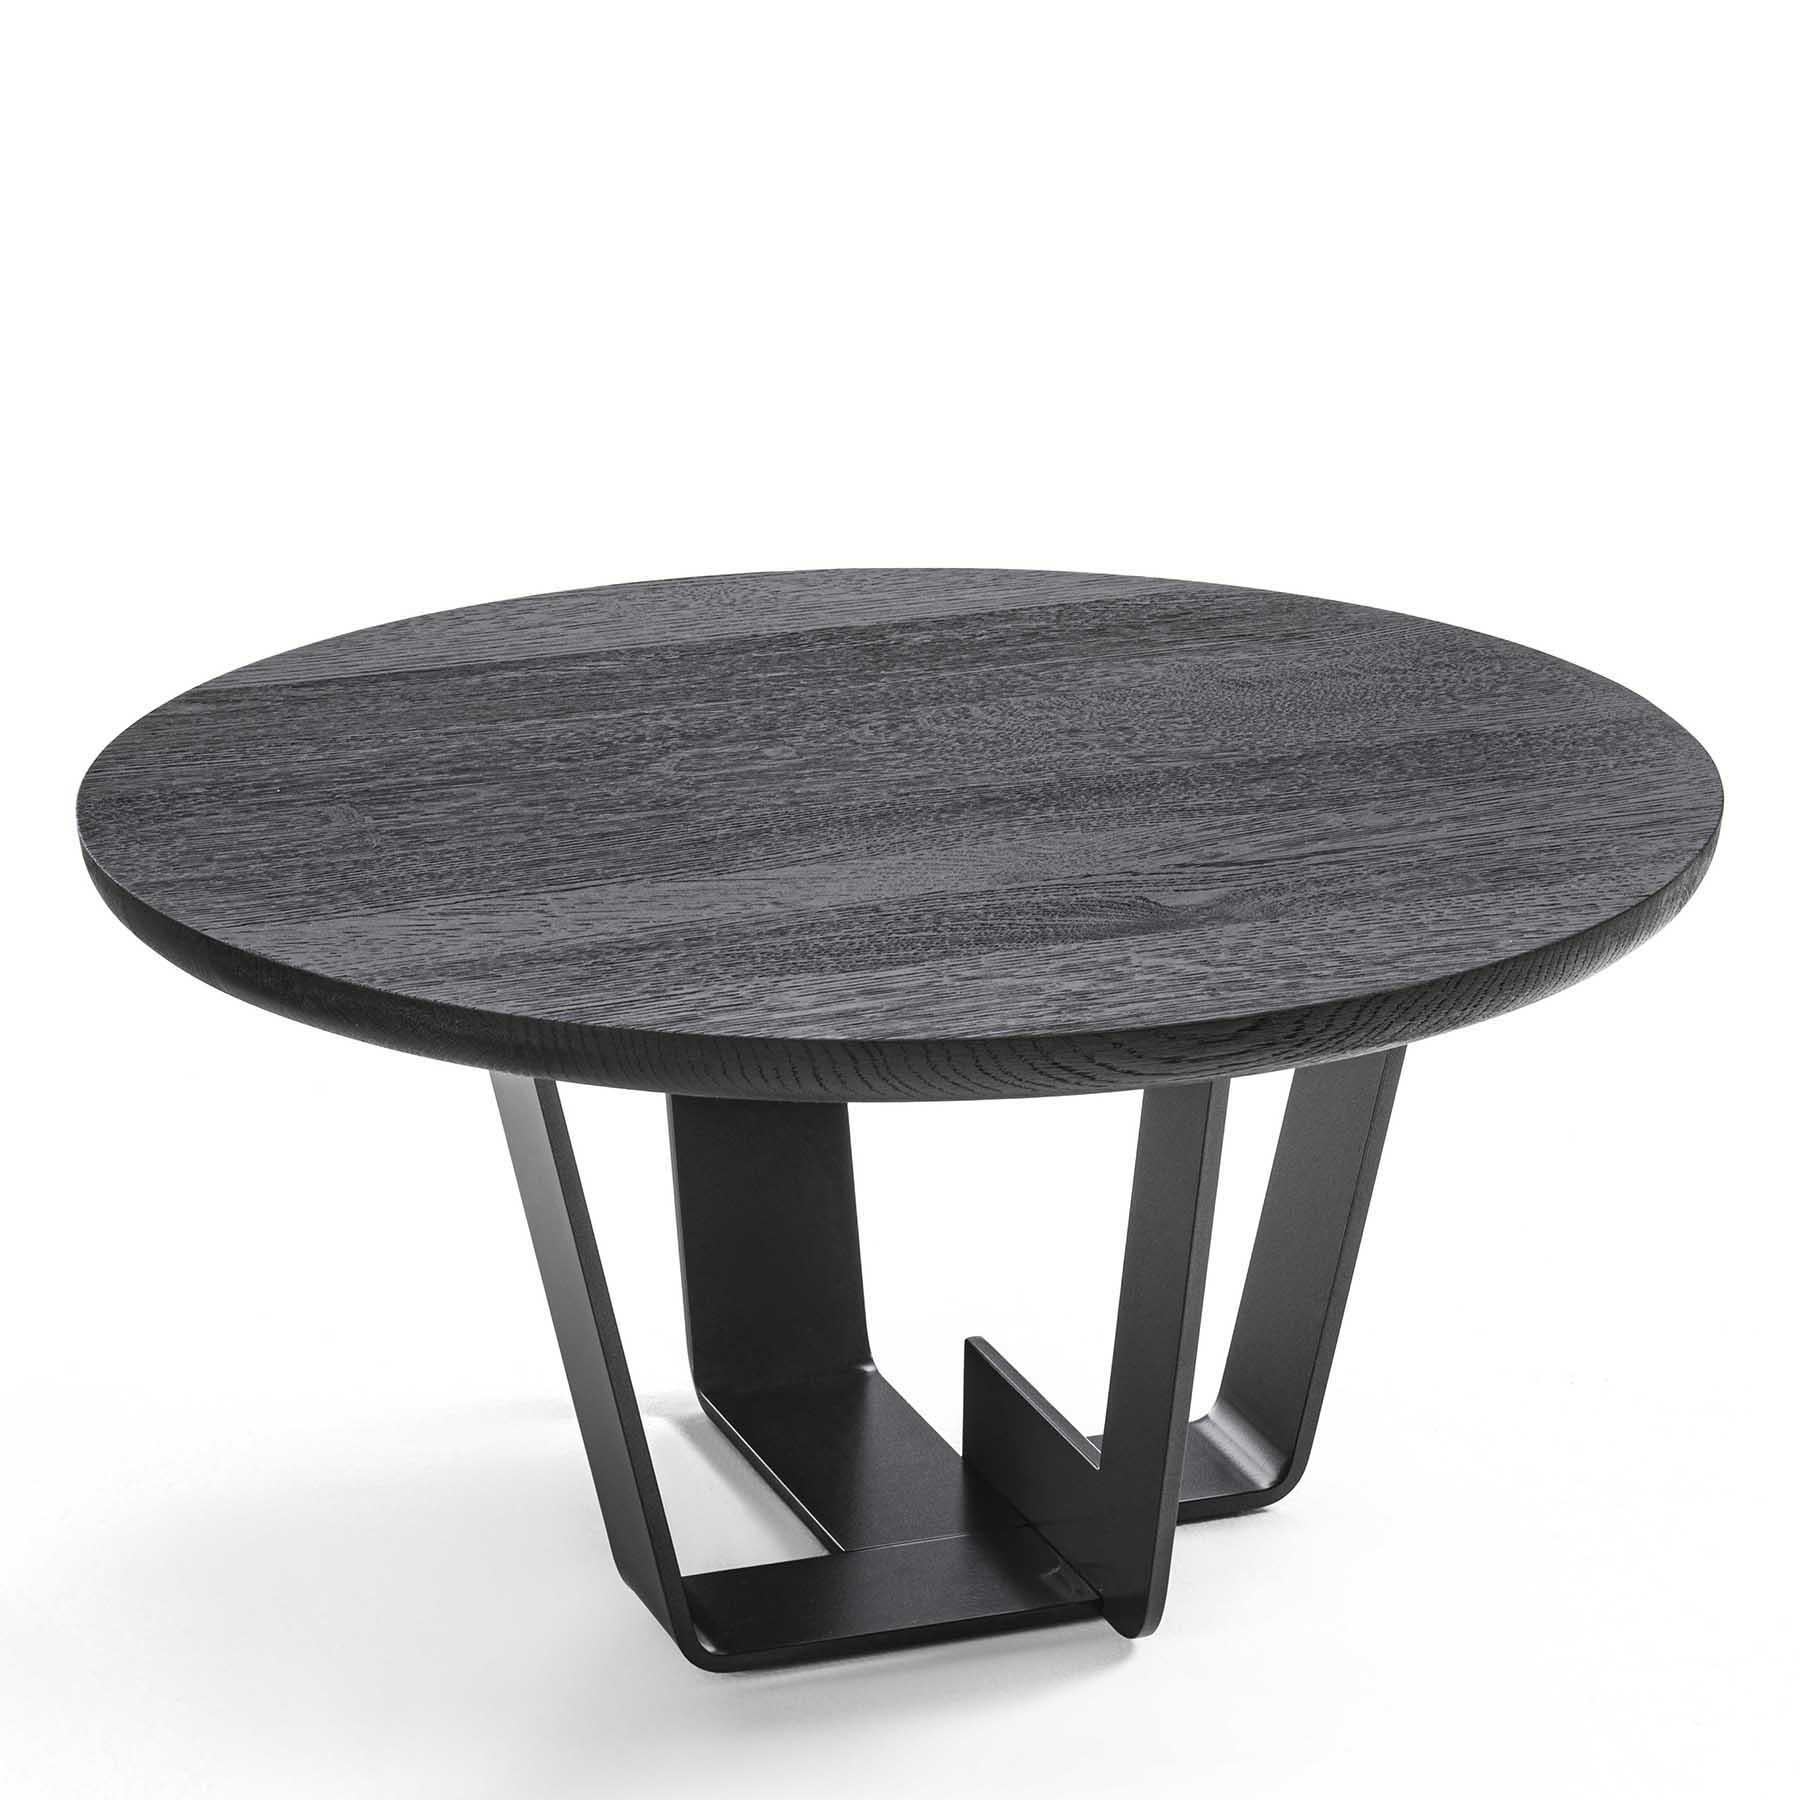 Coffee table jay black oak with base structure in
lacquered iron in iron dust finish. With solid oak top
without knots in black finish.
Also available with solid cherry or maple or walnut
wood top.
Also available with solid oak top in natural